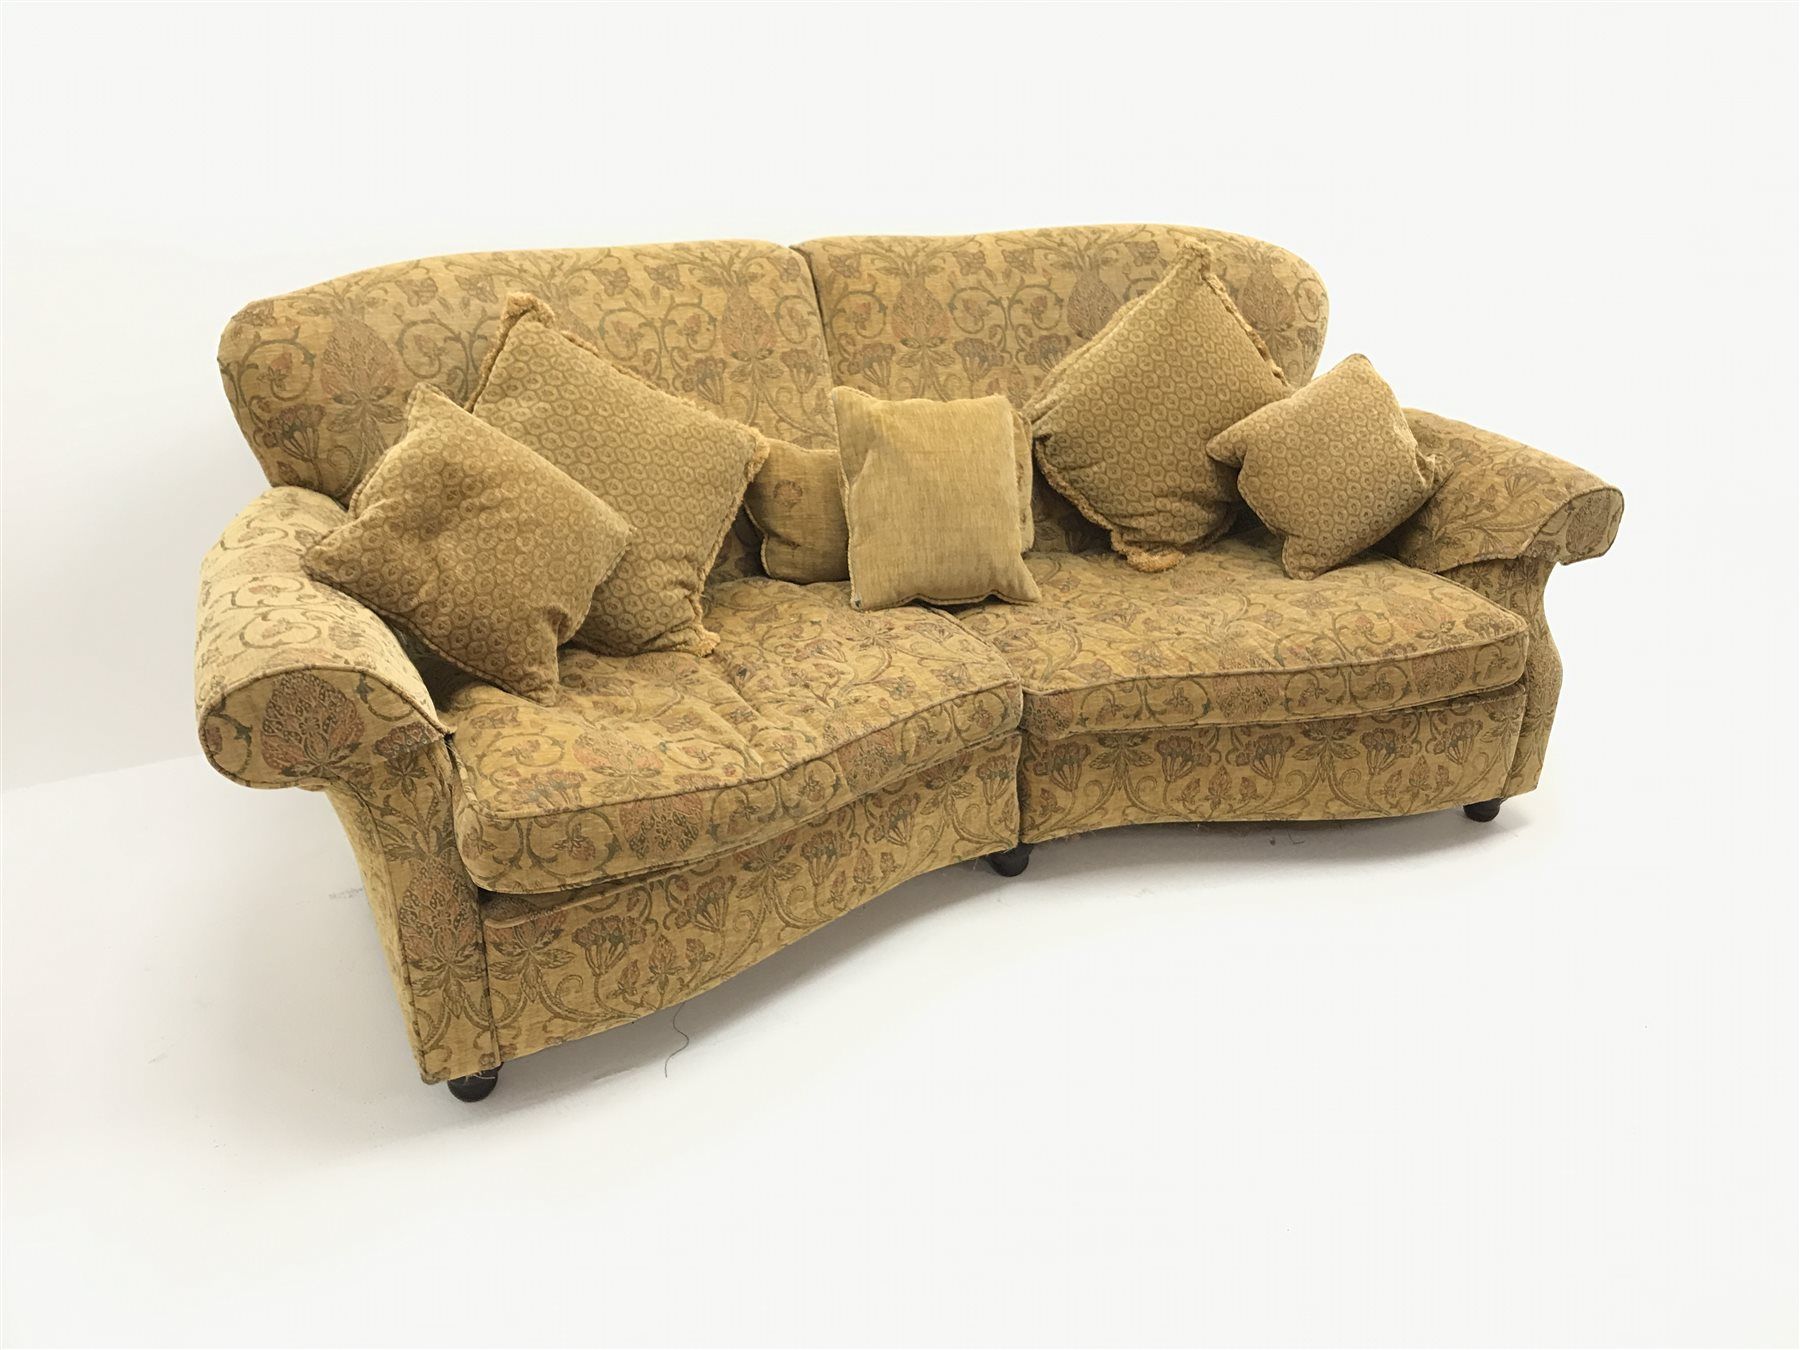 Three Seat Curved Traditional Sofa, Scrolled Arms, Upholstered In A Regarding Sofas With Curved Arms (View 7 of 20)